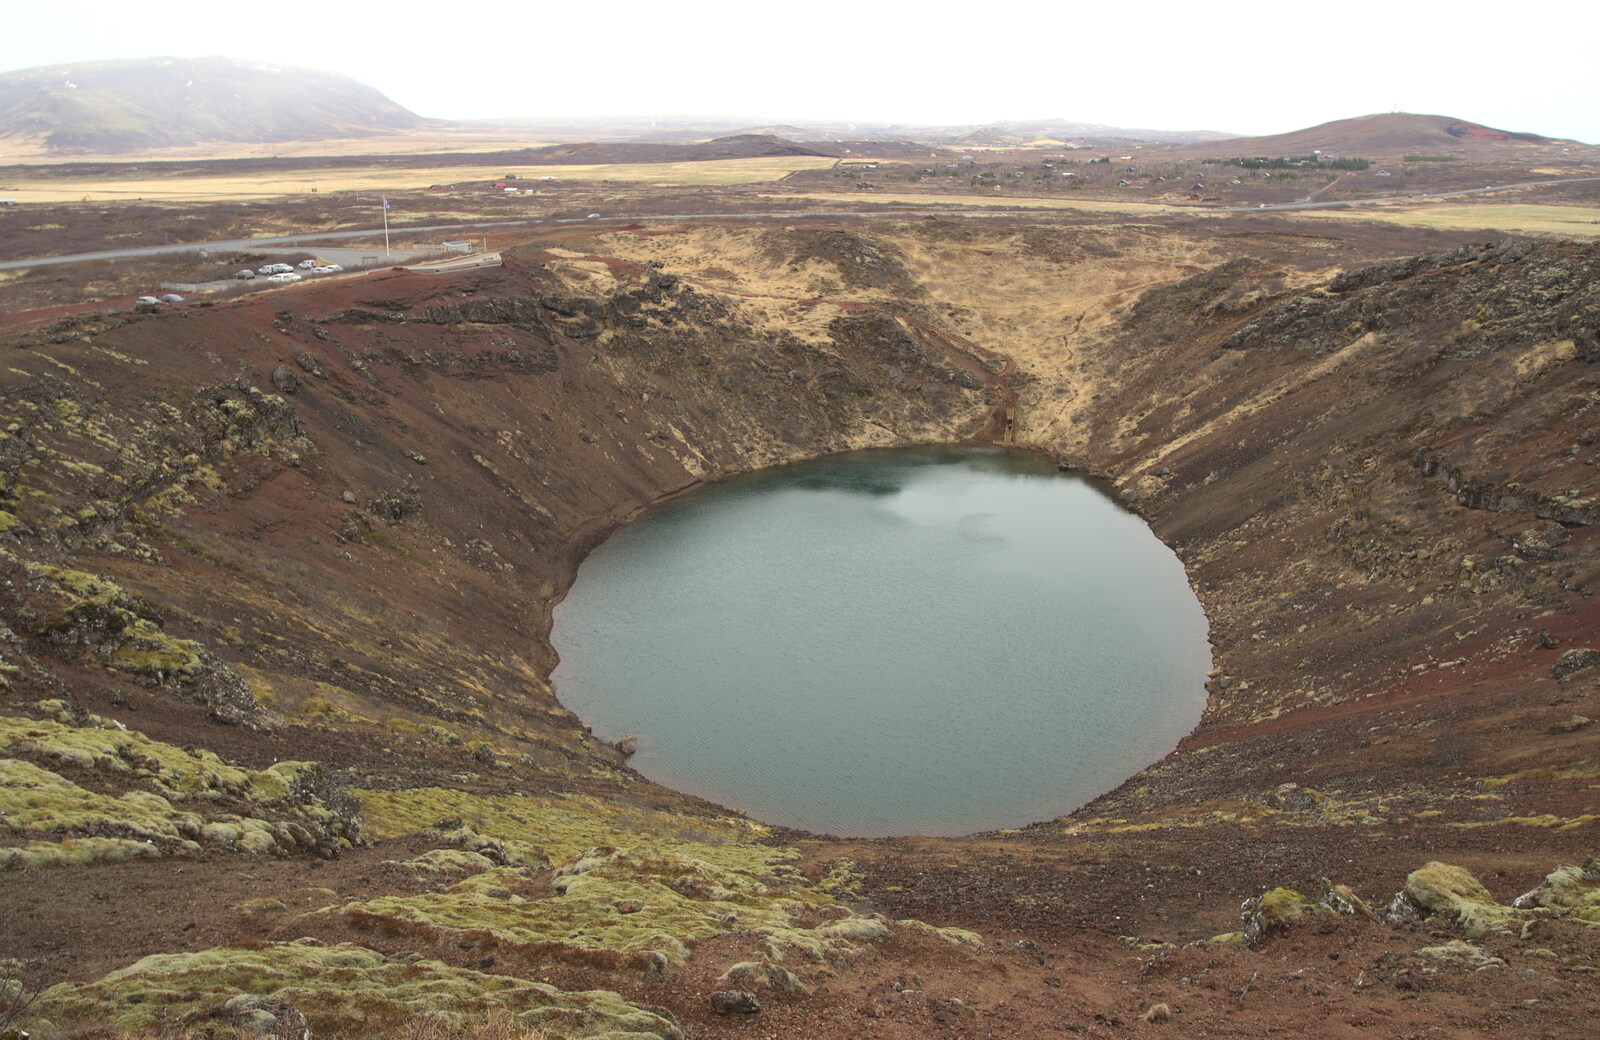 Volcano crater from The Golden Circle of Ísland, Iceland - 22nd April 2017